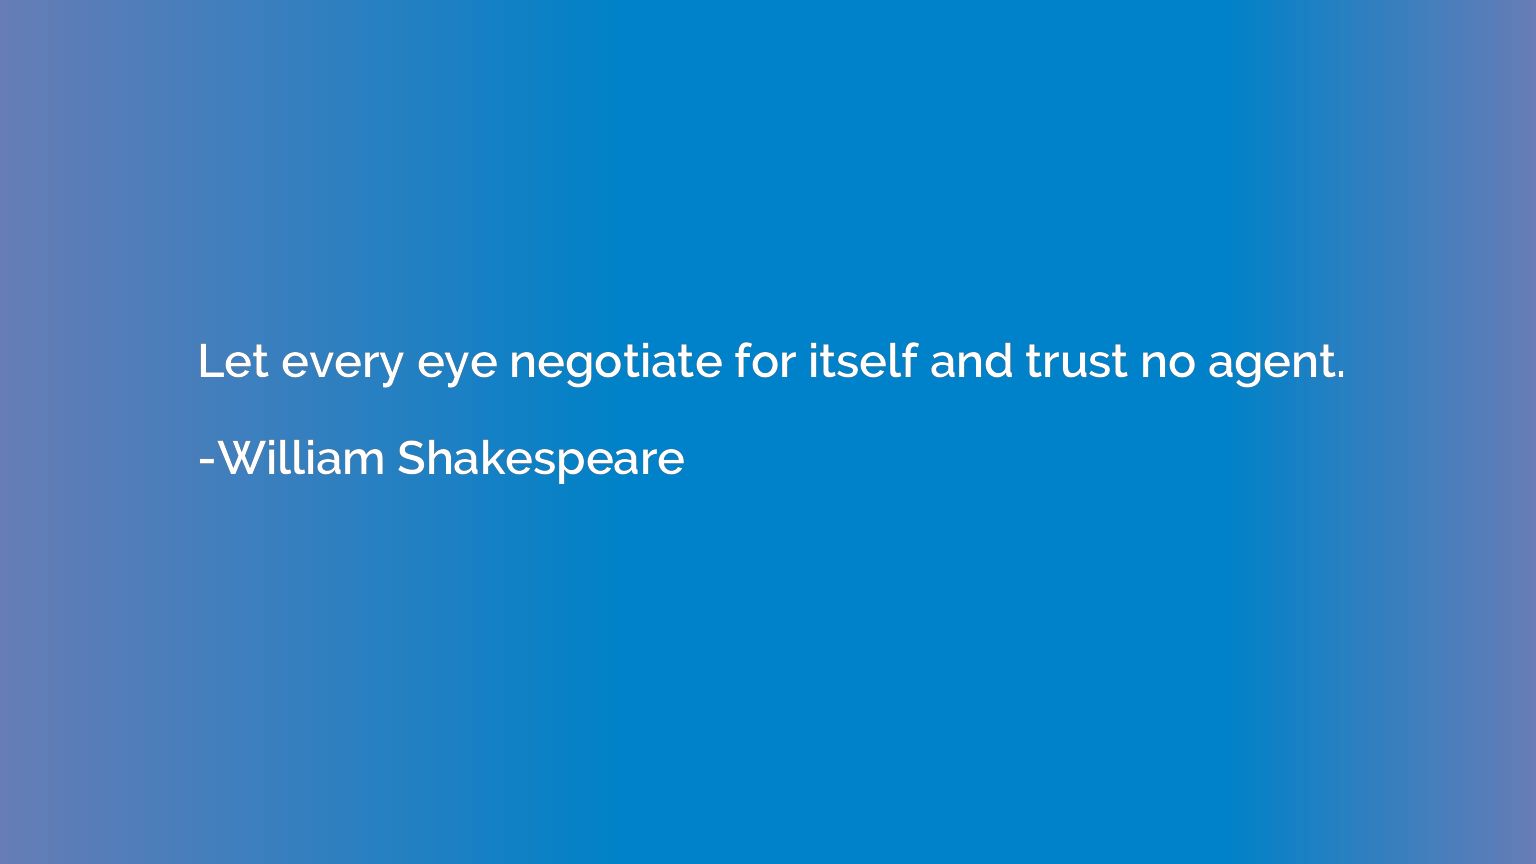 Let every eye negotiate for itself and trust no agent.